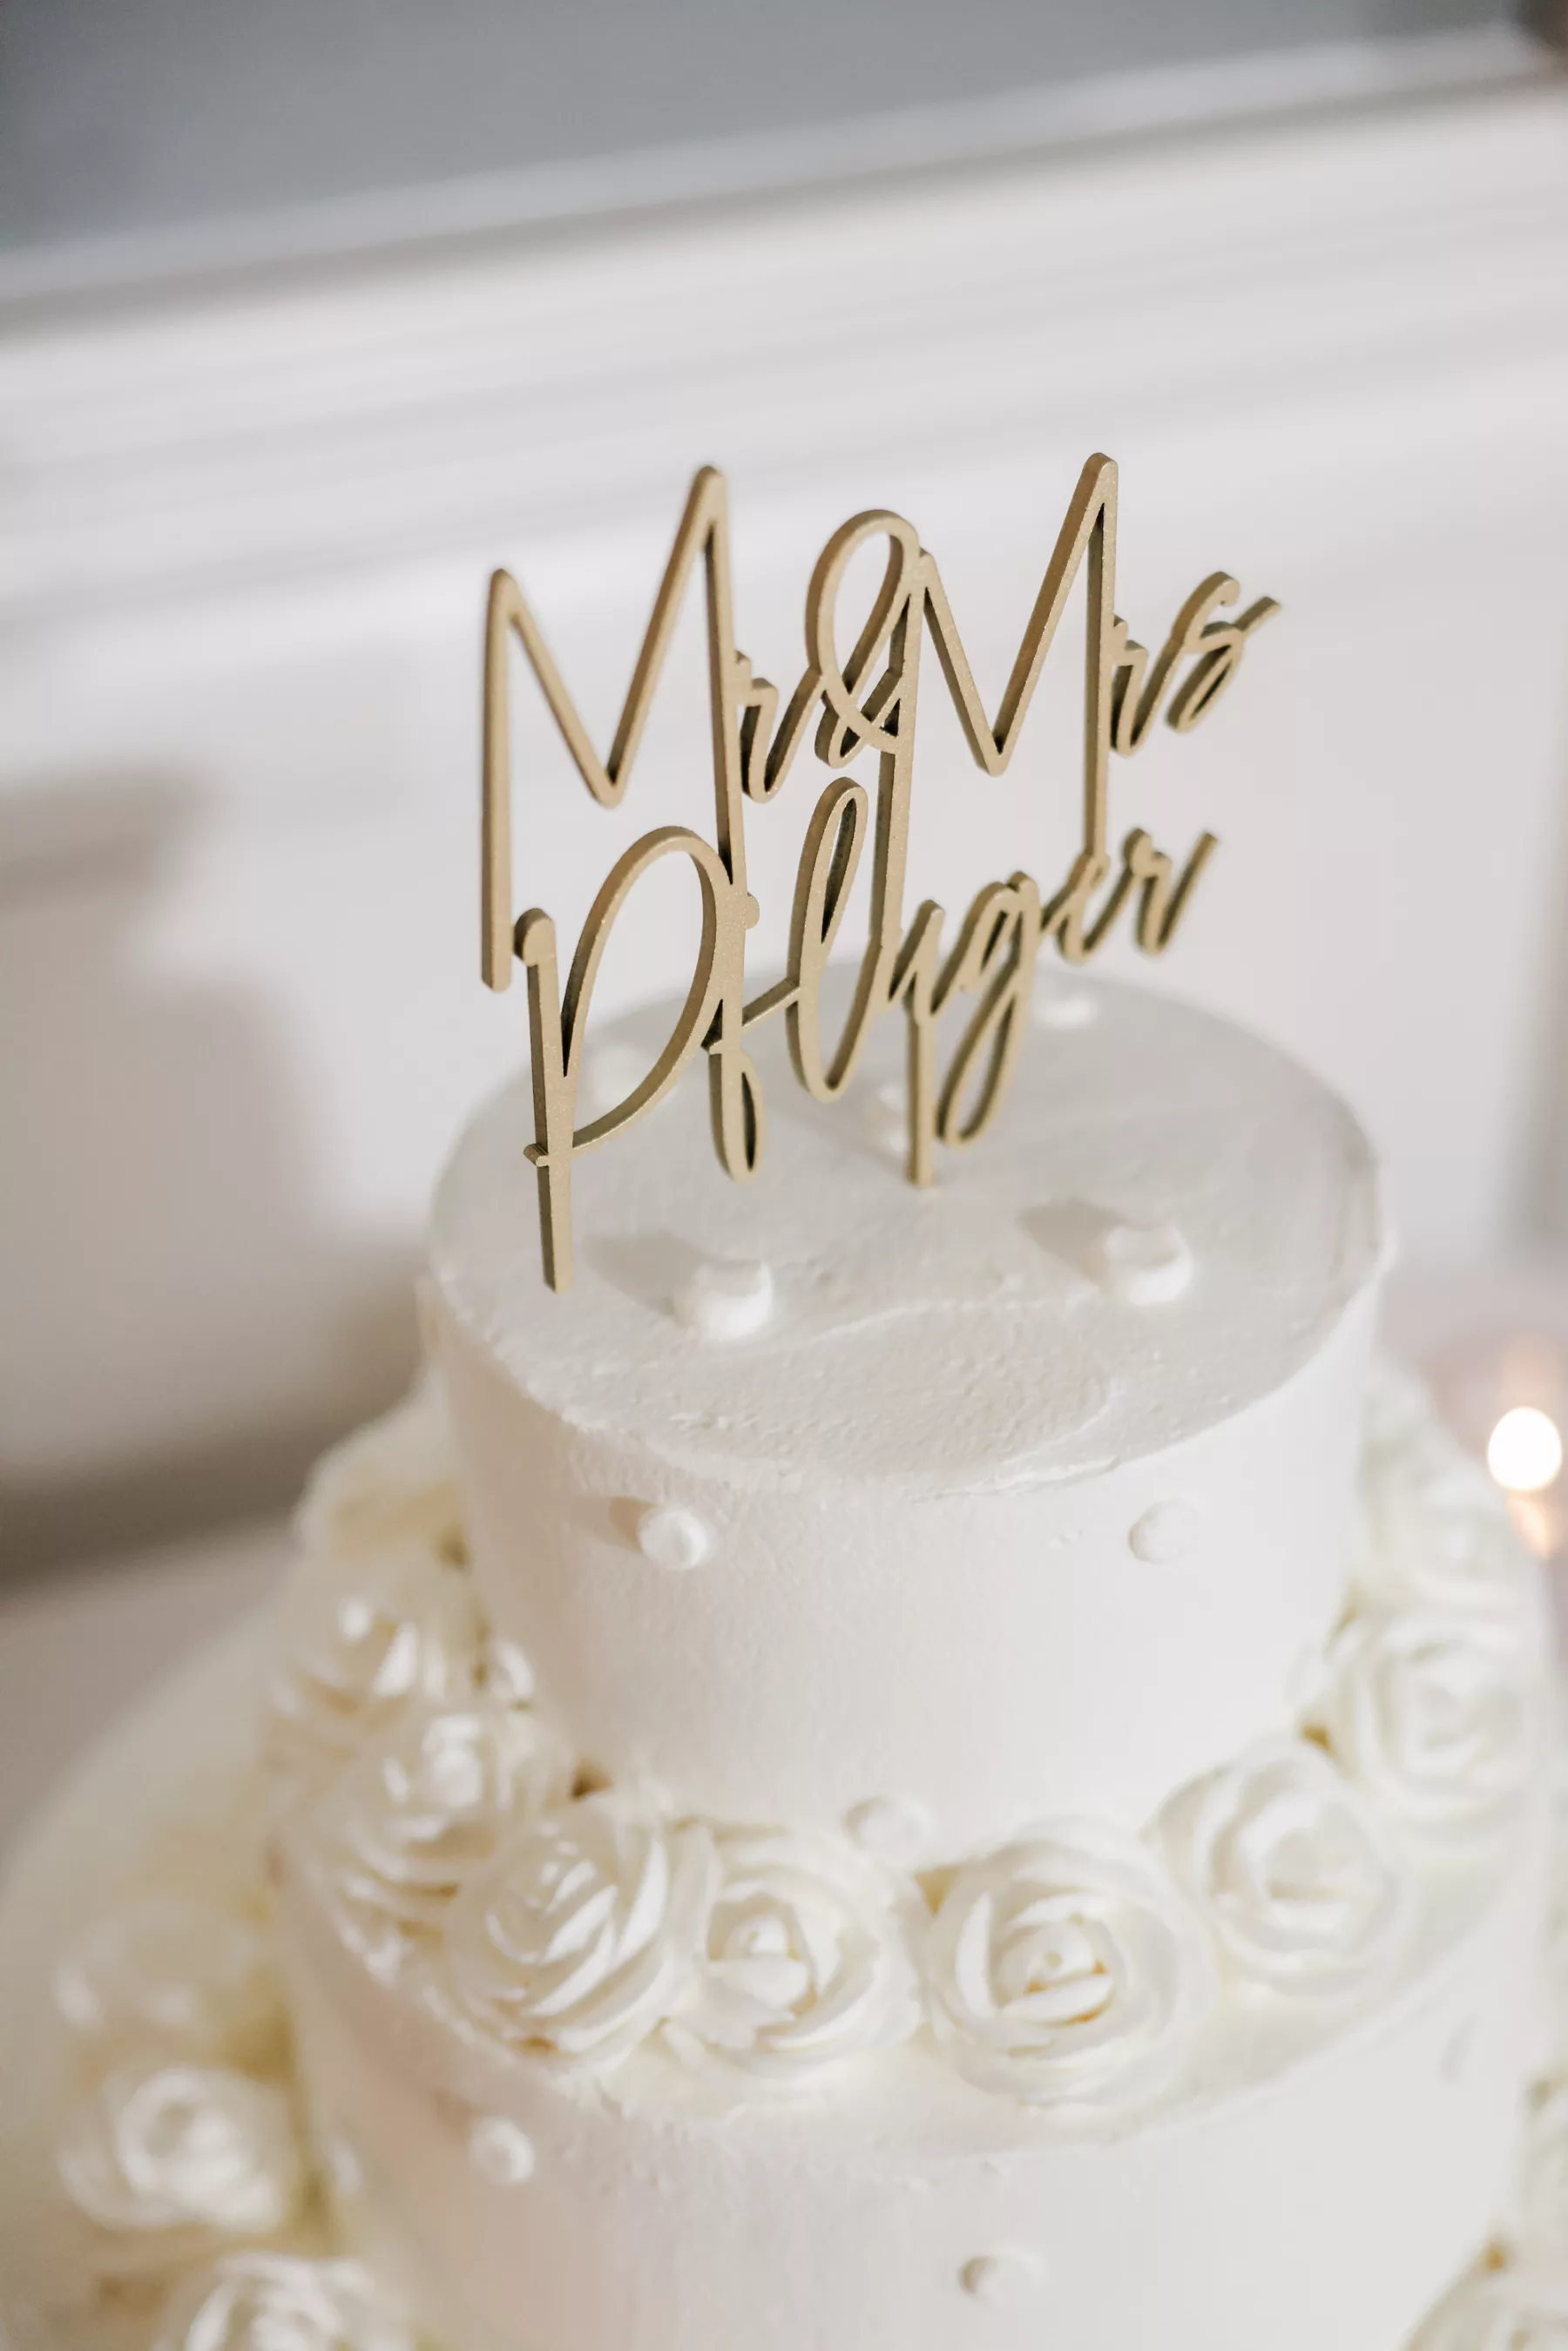 Custom Laser Cut Cake Topper Ideas | White Two-Tiered Round Buttercream Wedding Cake with Icing Flowers Inspiration